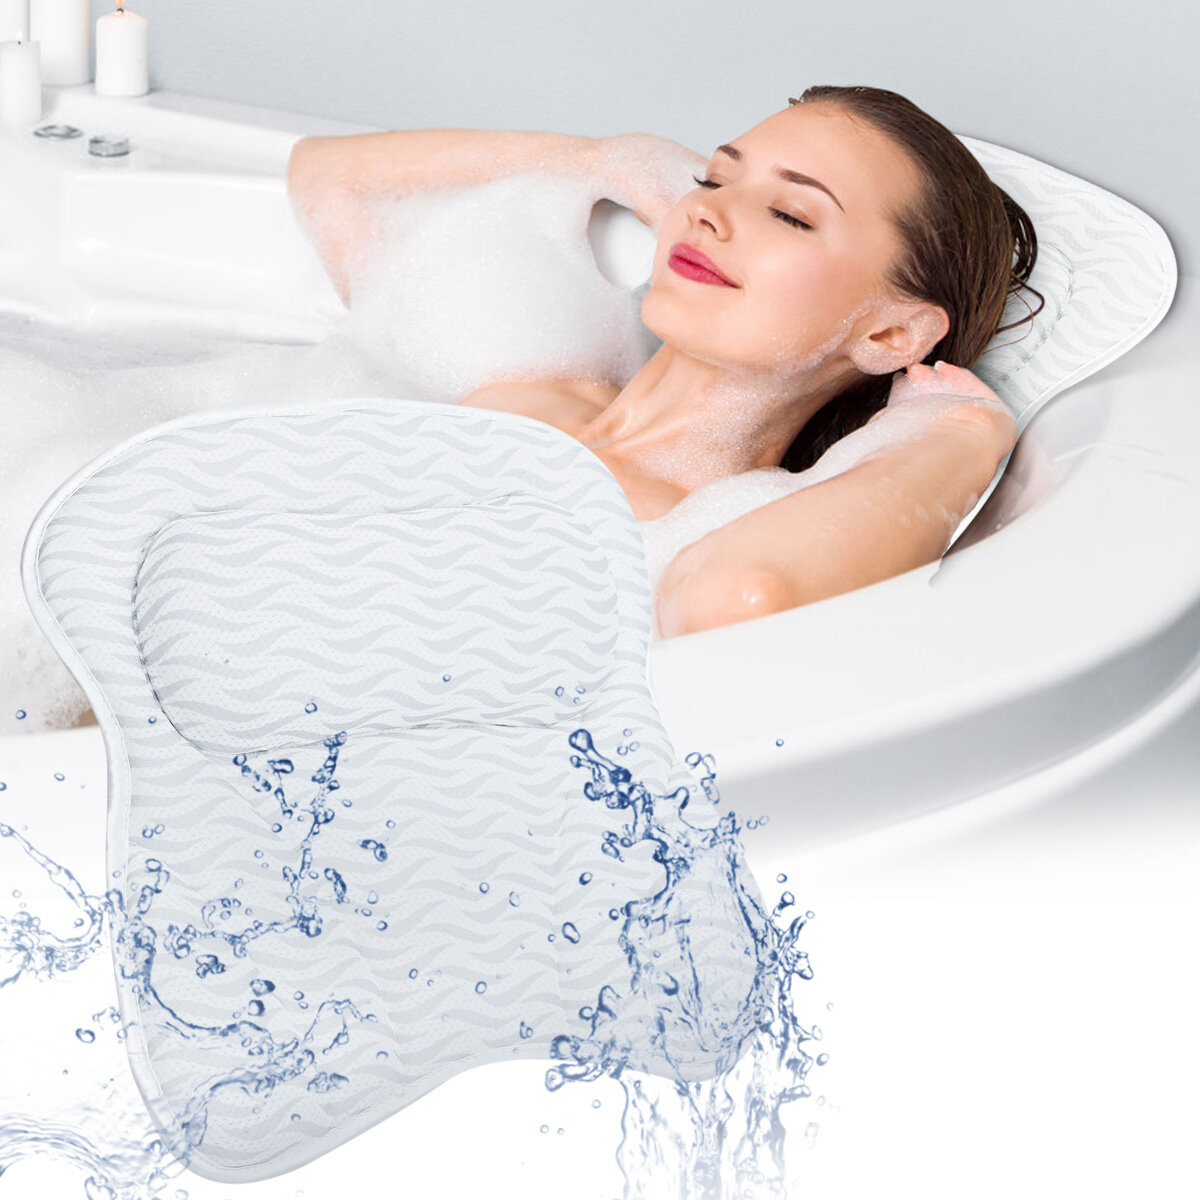 SAWAKE Bath Pillow Spirity Ergonomic with Neck and Back Support Comfortable Bathtub Pillows for Rela